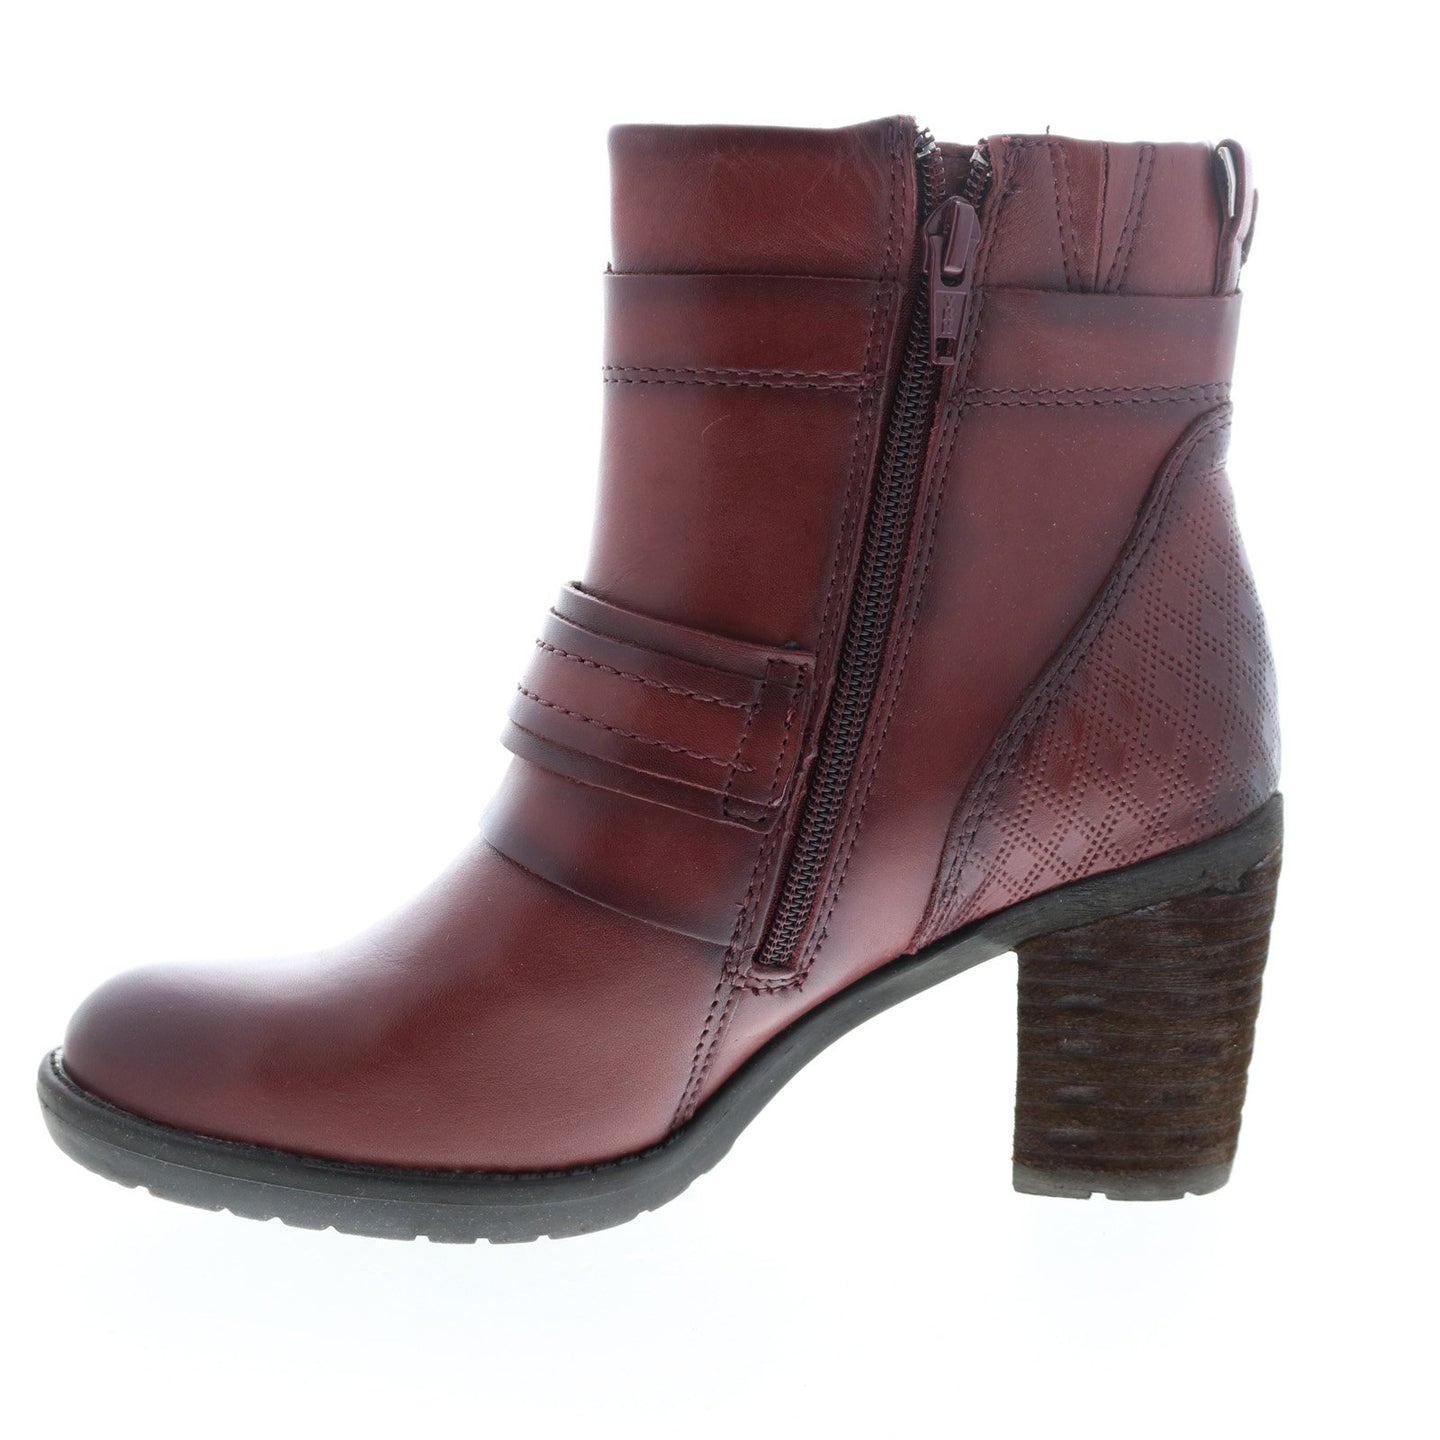 Earth Montana Womens Burgundy Leather Zipper Ankle & Booties Boots ...